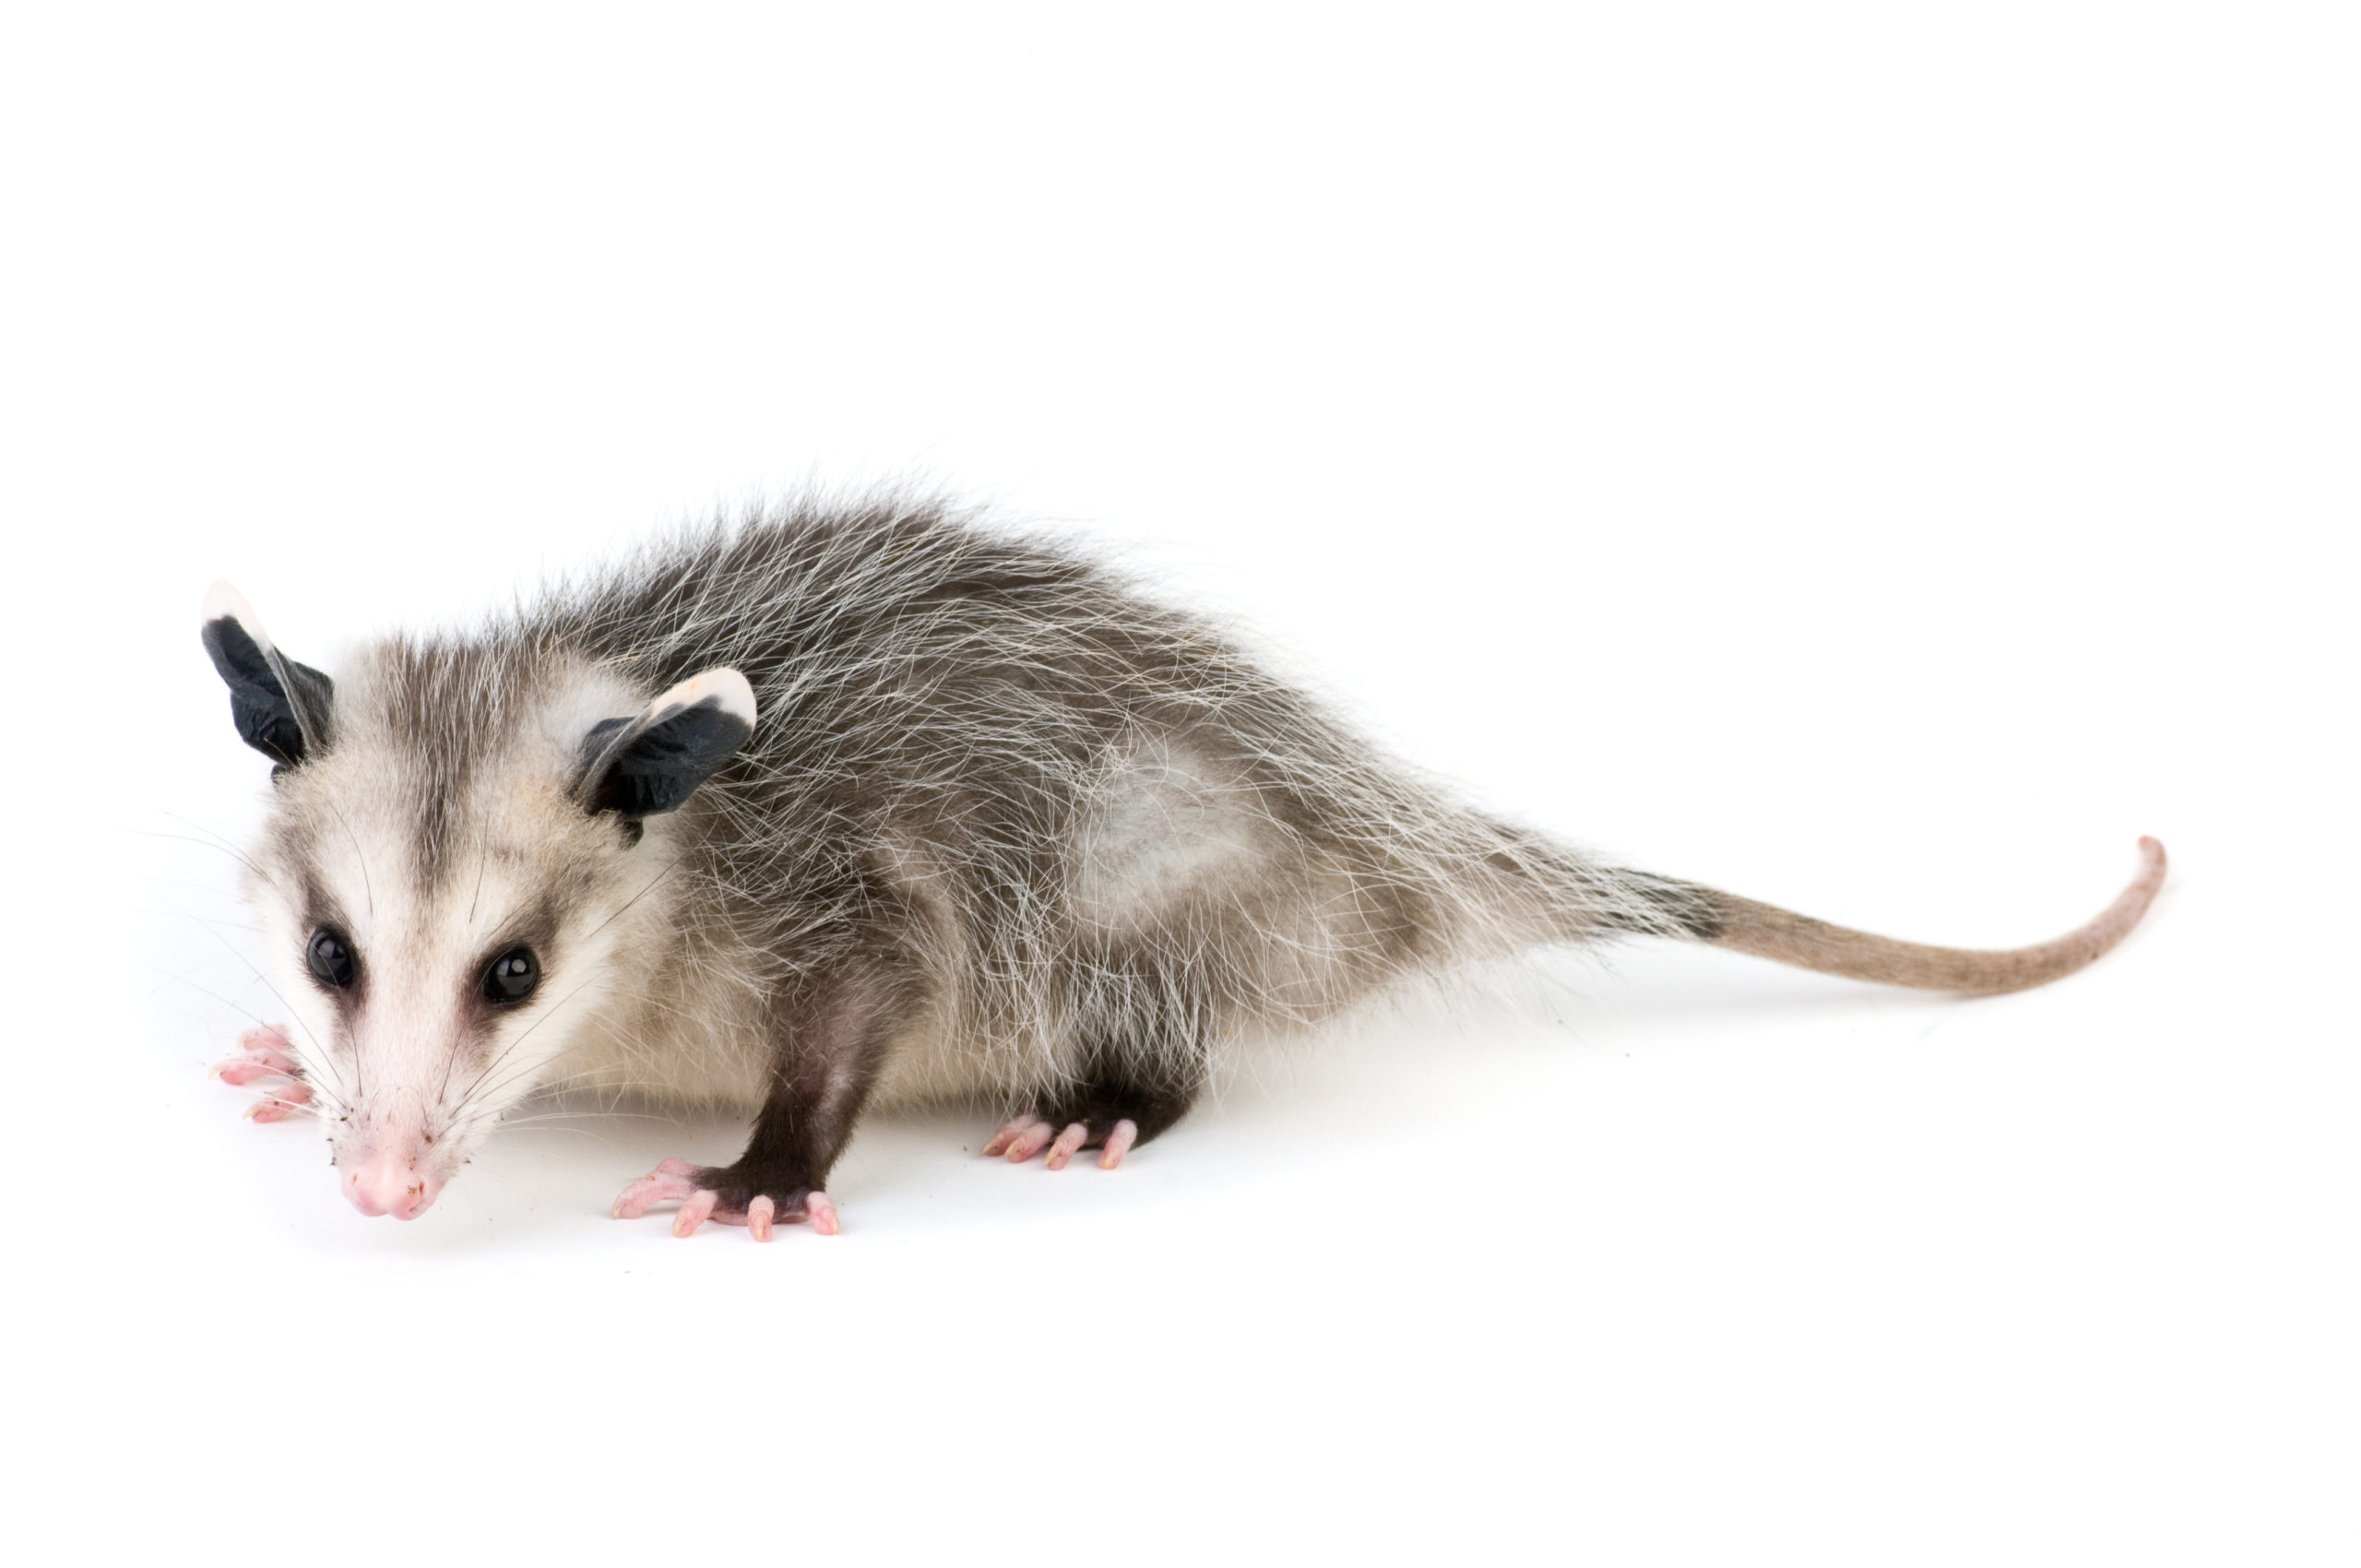 Opossum Trapping and Removal Services in East Tennessee